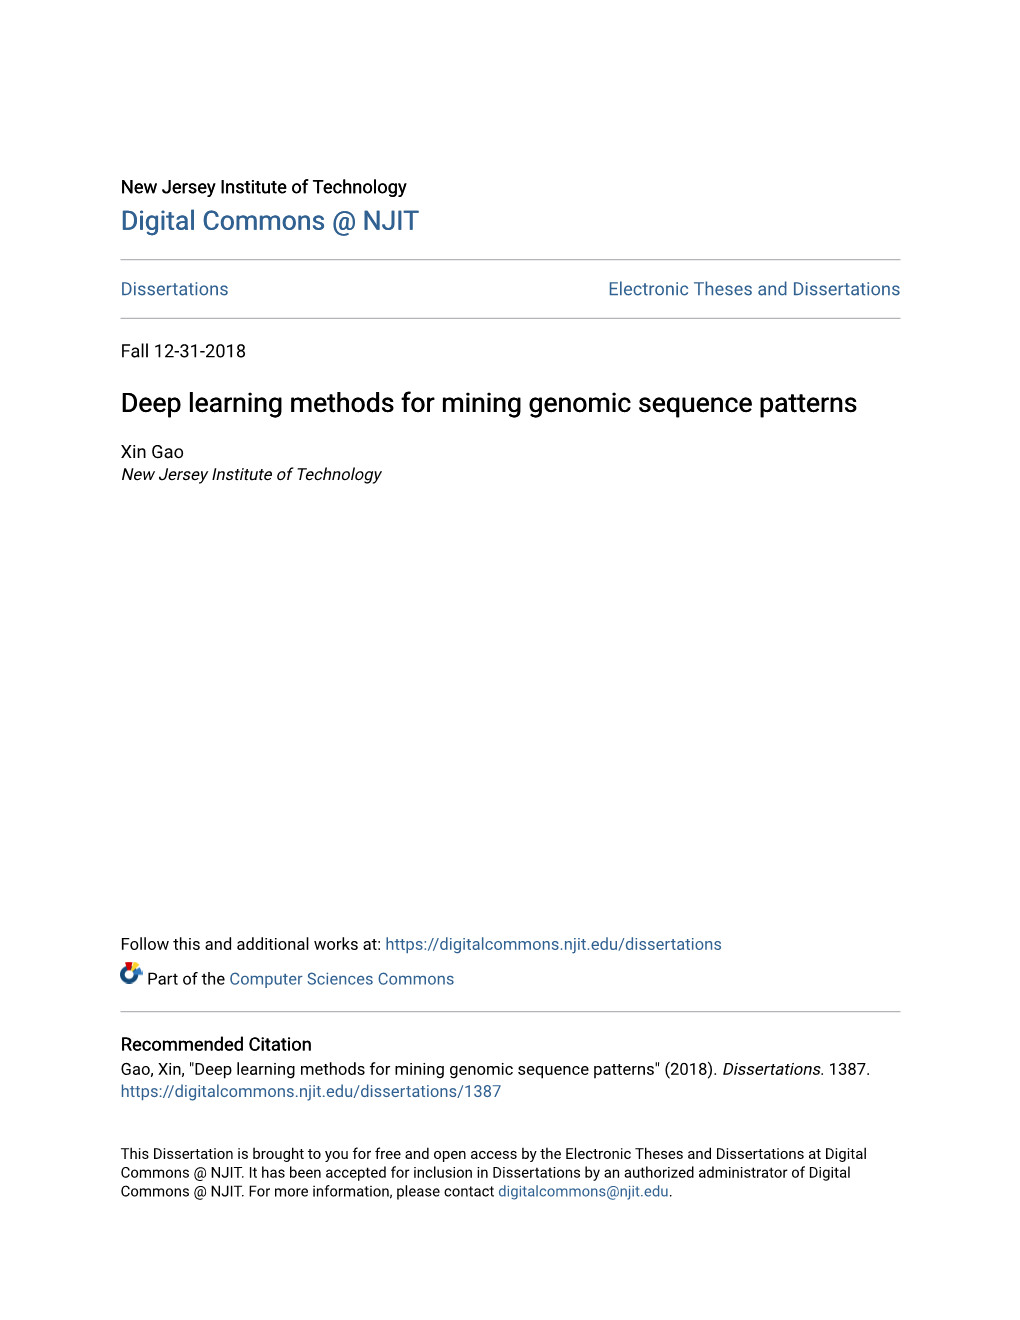 Deep Learning Methods for Mining Genomic Sequence Patterns